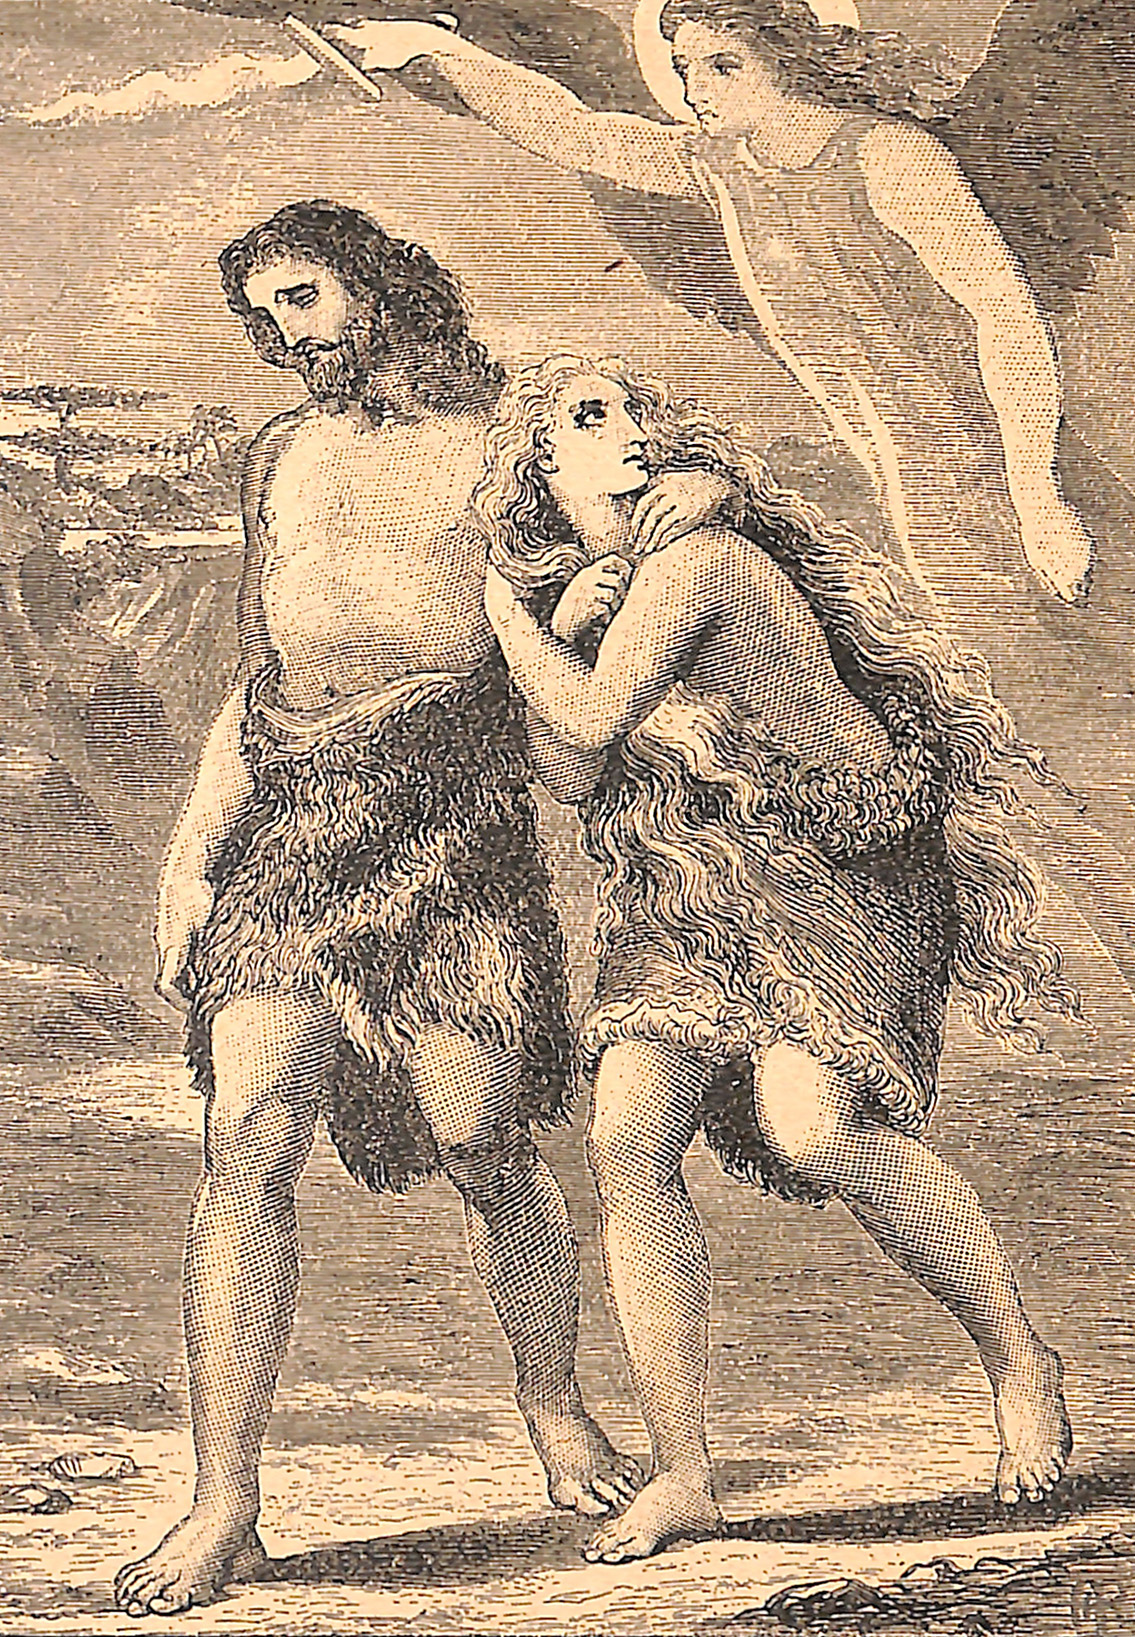 Adam and Eve driven out of Eden